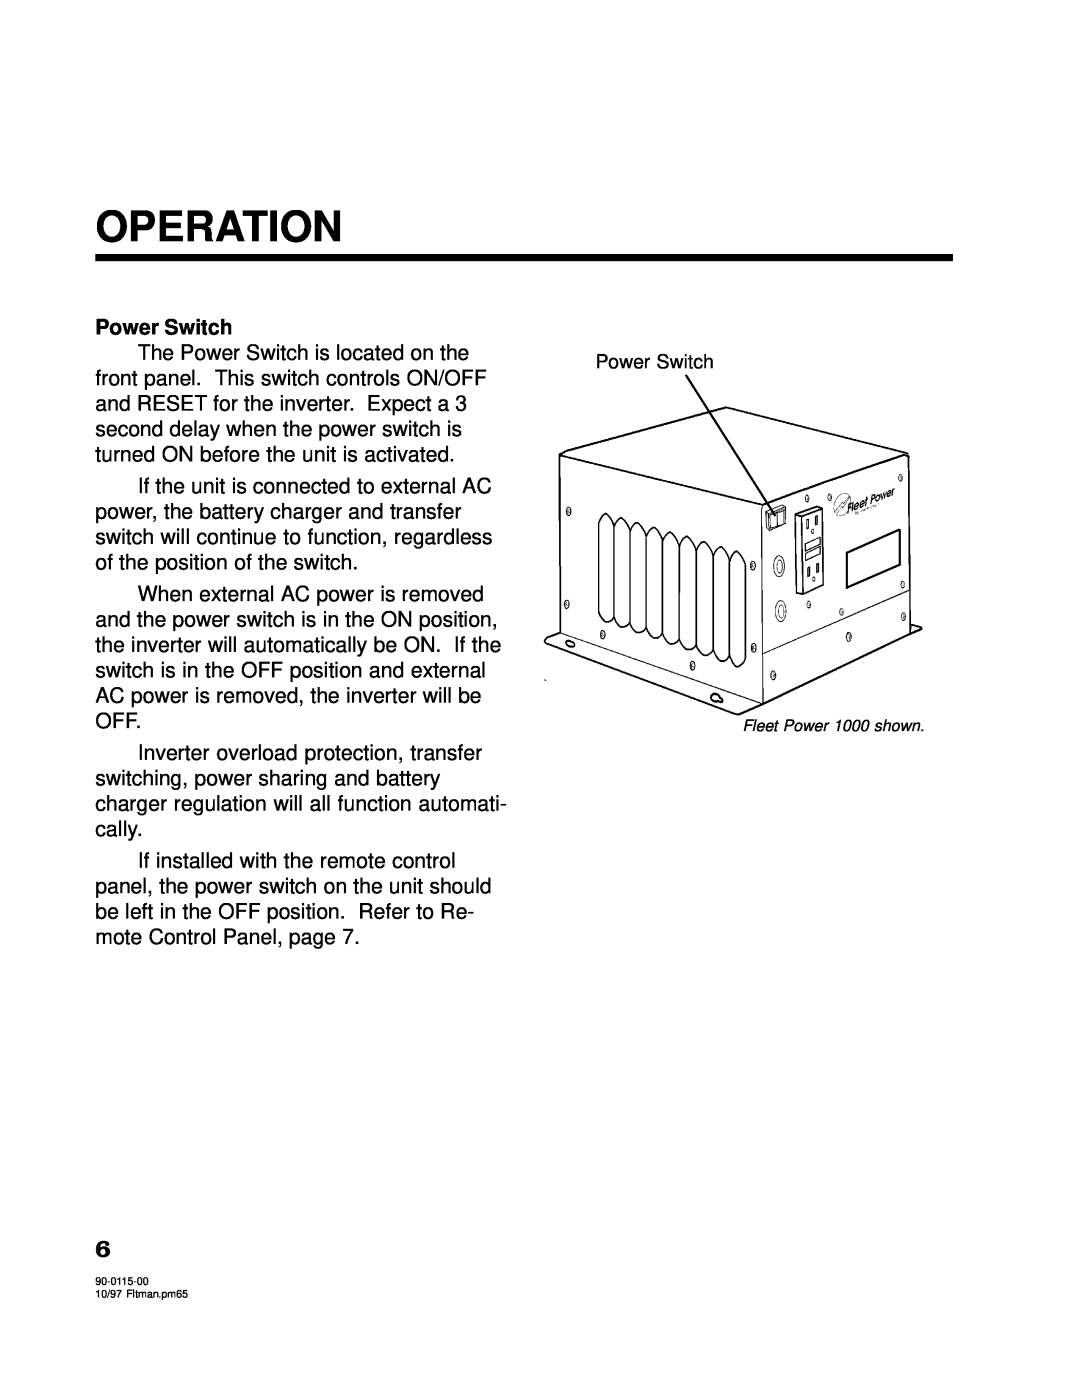 Xantrex Technology 2500, 2000 owner manual Operation, Power Switch 